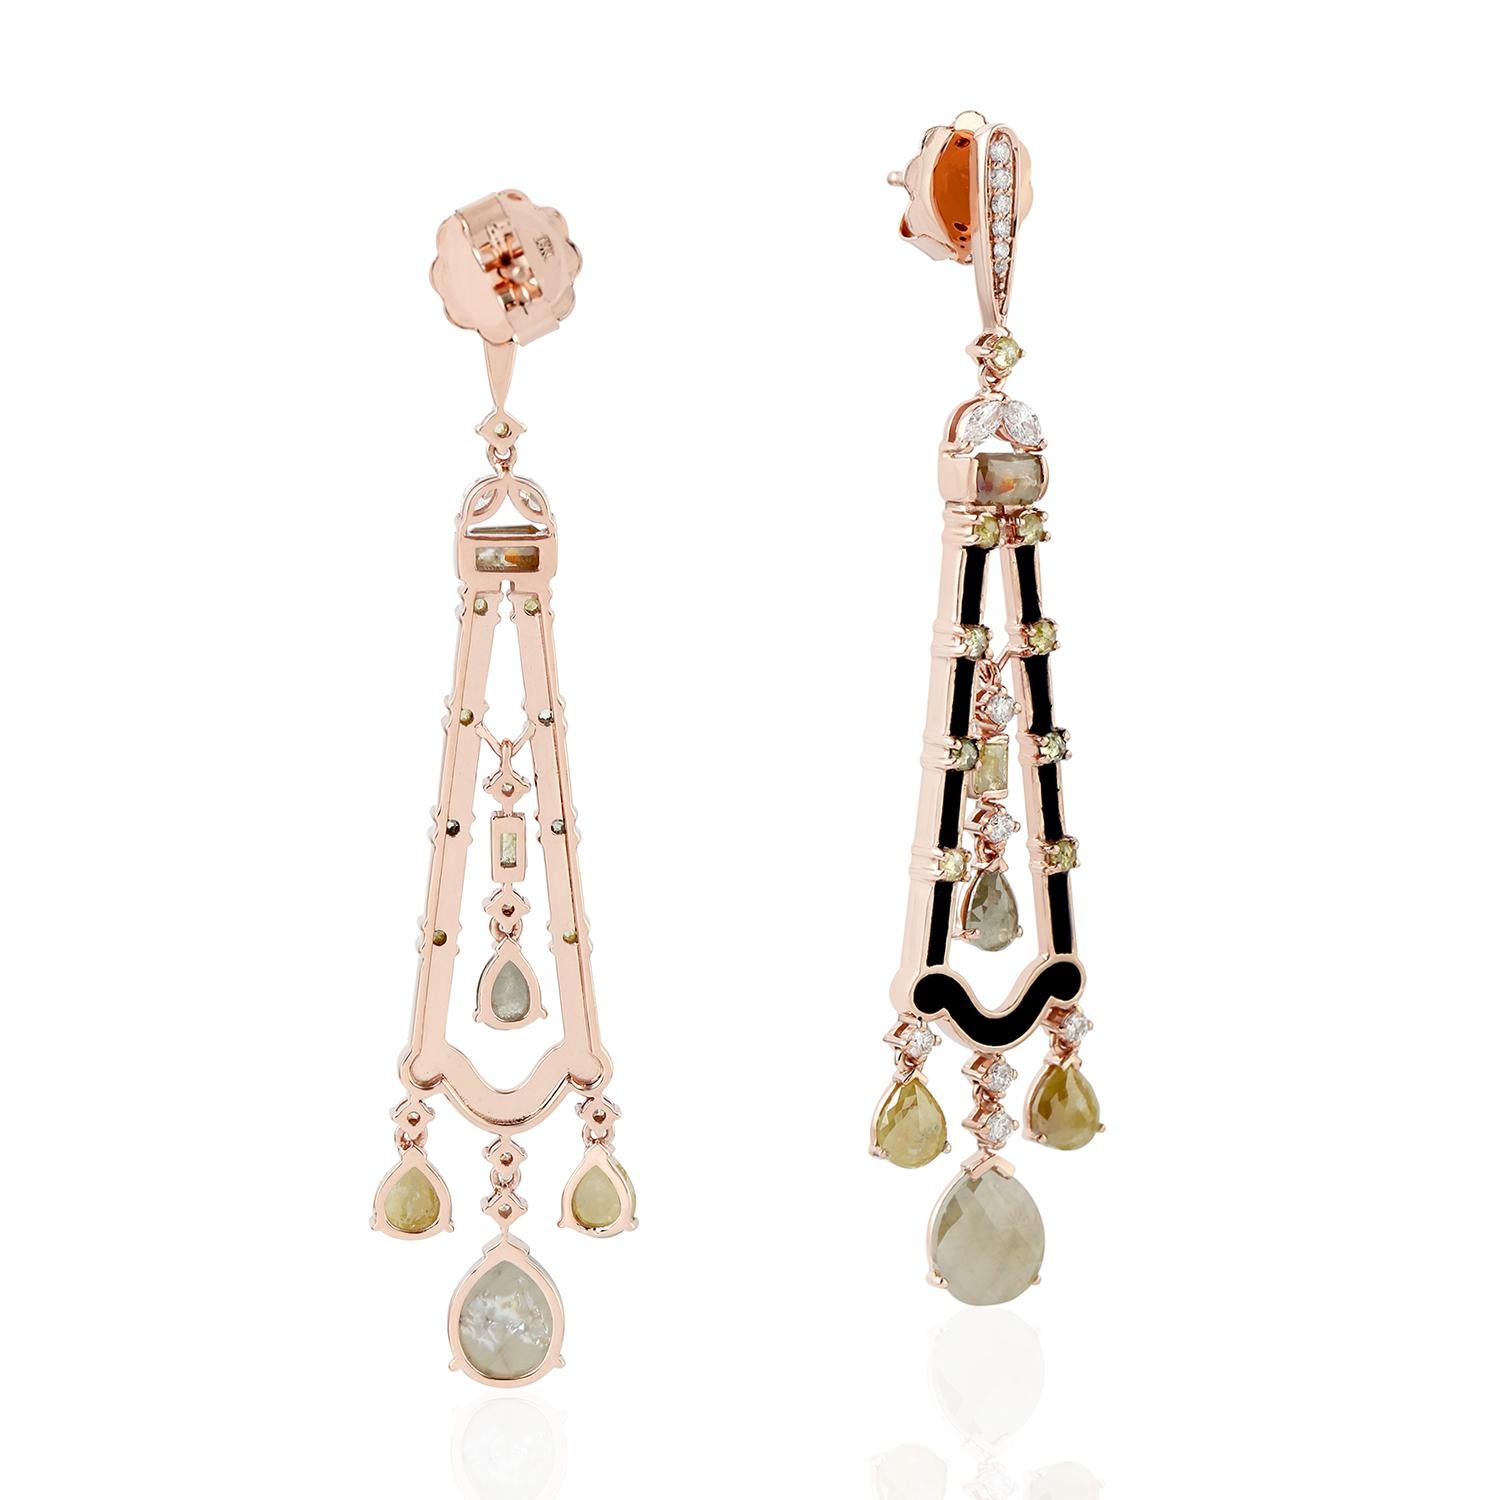 Round Cut Modern Eclectic Looking White and Brown Diamond and Enamel Earrings in 18K Gold